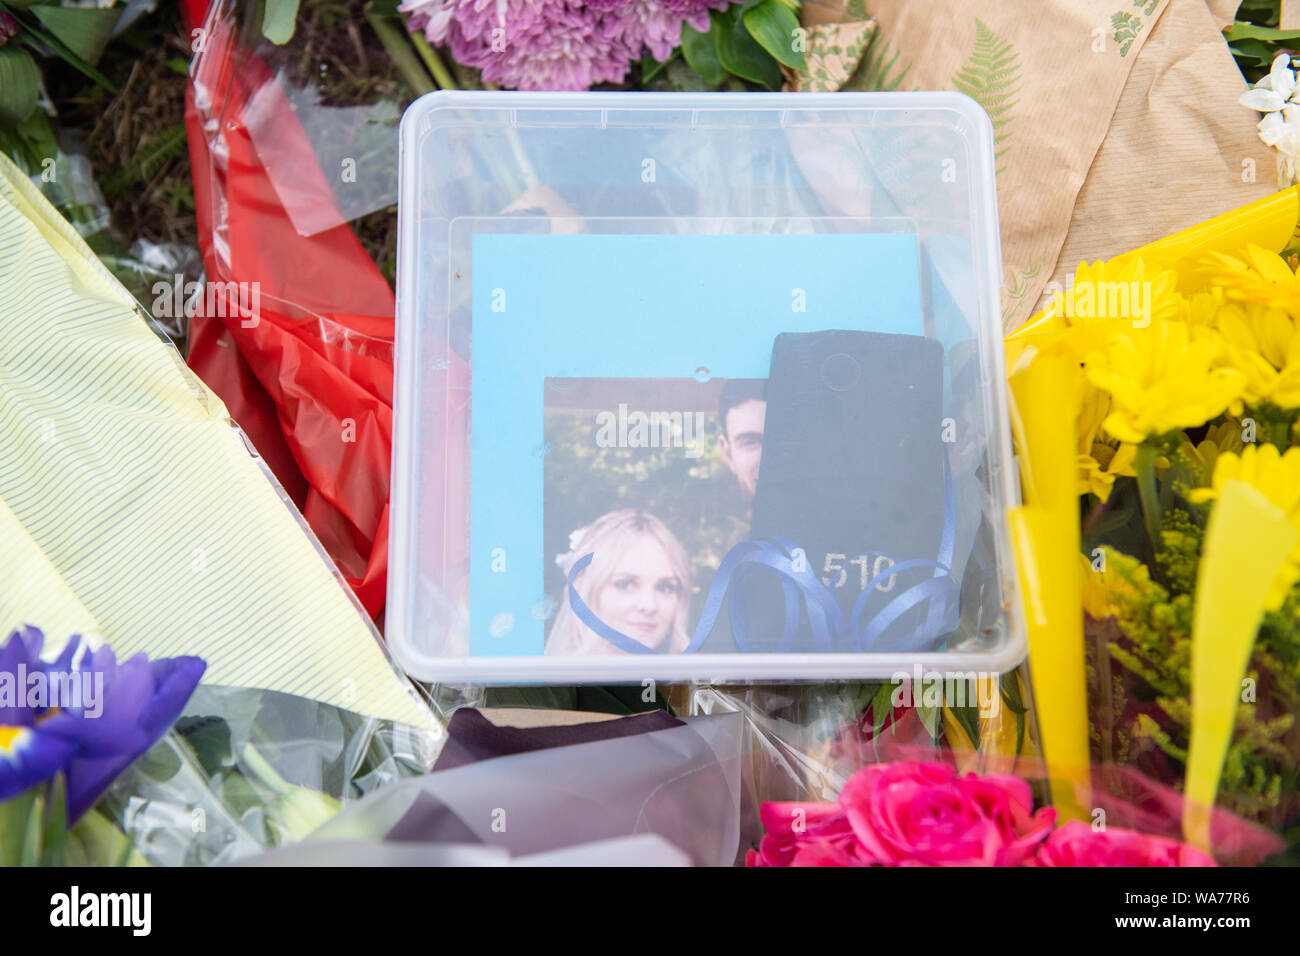 Tributes left near the scene where Thames Valley Police officer Pc Andrew Harper, 28, died following a 'serious incident' at about 11.30pm on Thursday near the A4 Bath Road, between Reading and Newbury, at the village of Sulhamstead in Berkshire. Stock Photo